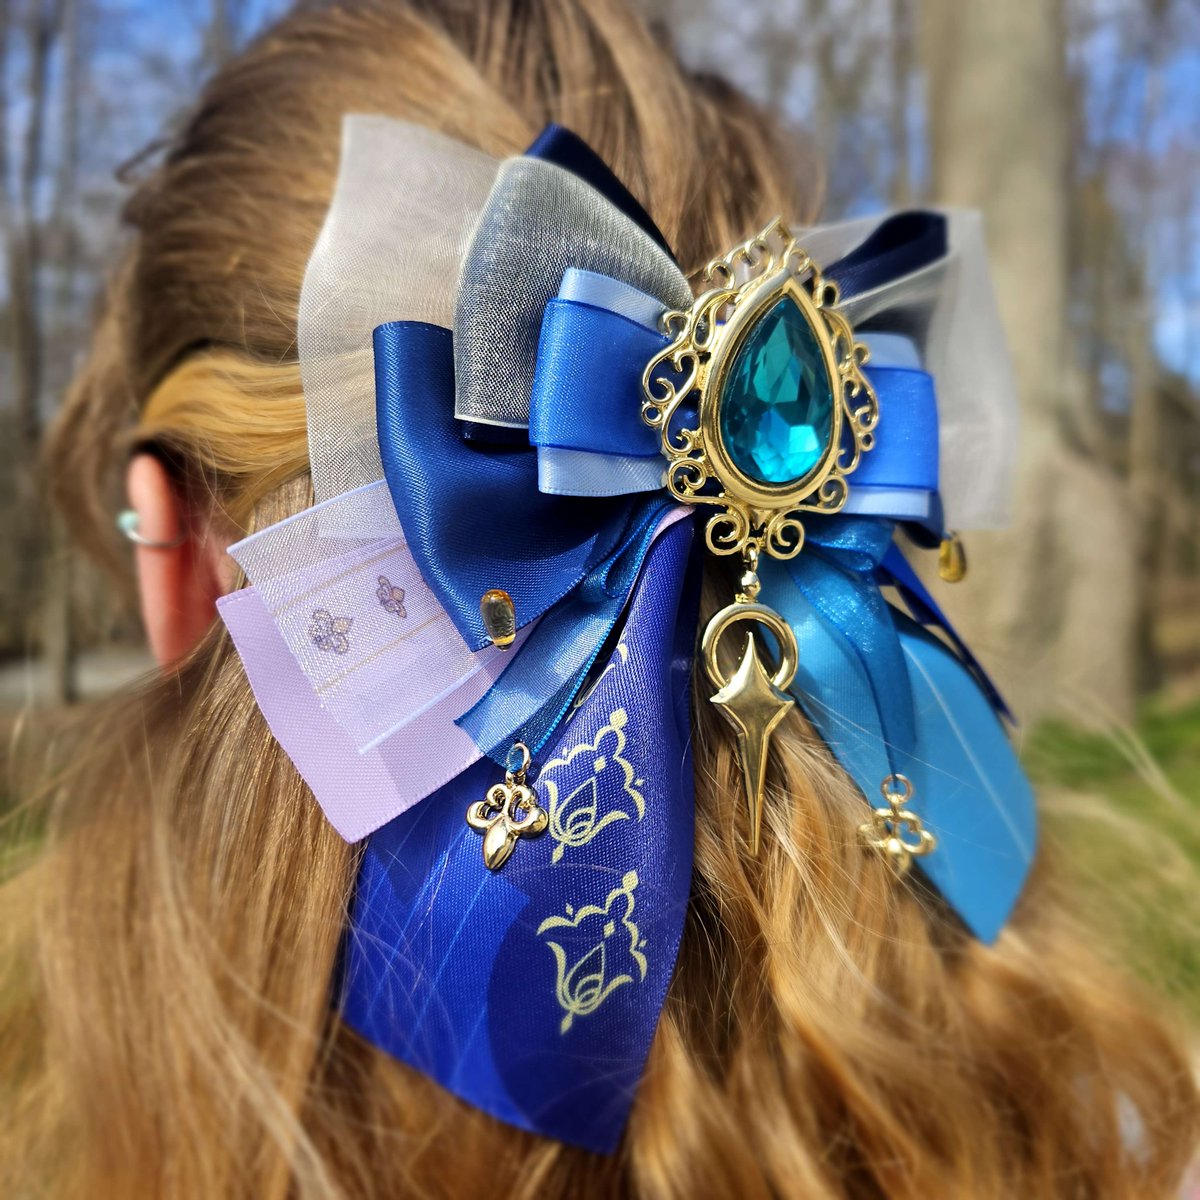 💧PREORDERS💧 We've received a sample of our #Furina hair bow 🎀 Here's a look on dark and light hair! 😍 Changes: smaller gem, fleur-de-lis pendants flipped right side up, gold instead of yellow on ribbons fontainezine.bigcartel.com/product/bow-ad… #Genshin #GenshinImpact #Fontaine